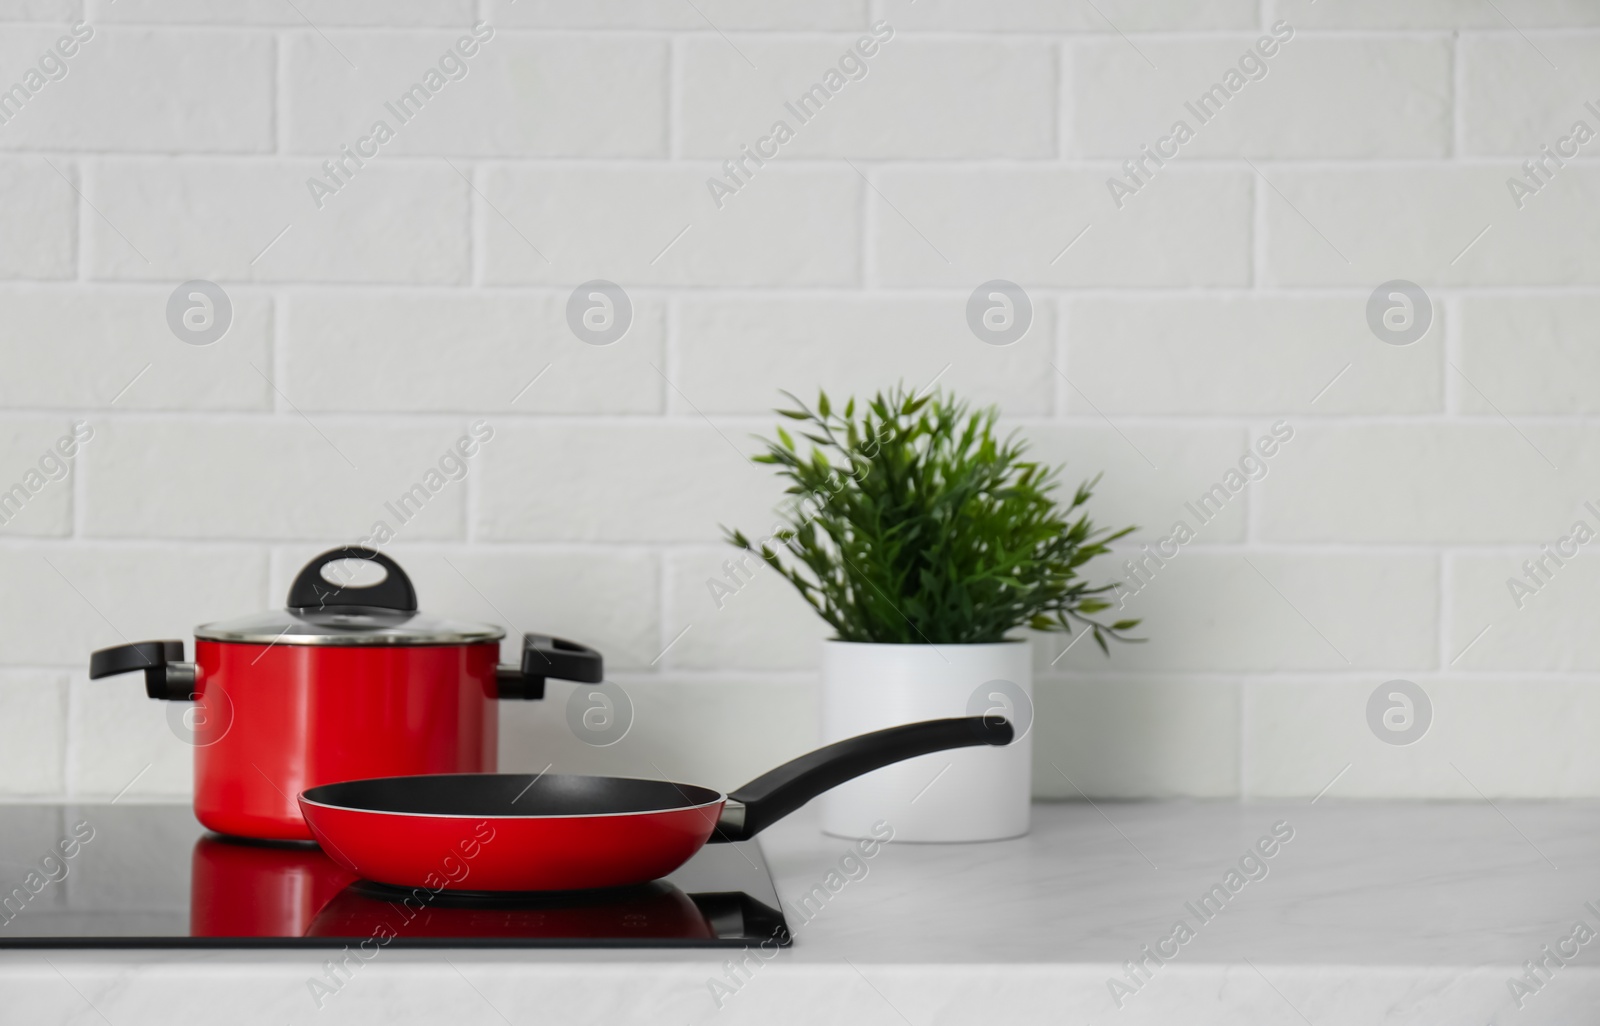 Photo of Saucepot and frying pan on induction stove in kitchen